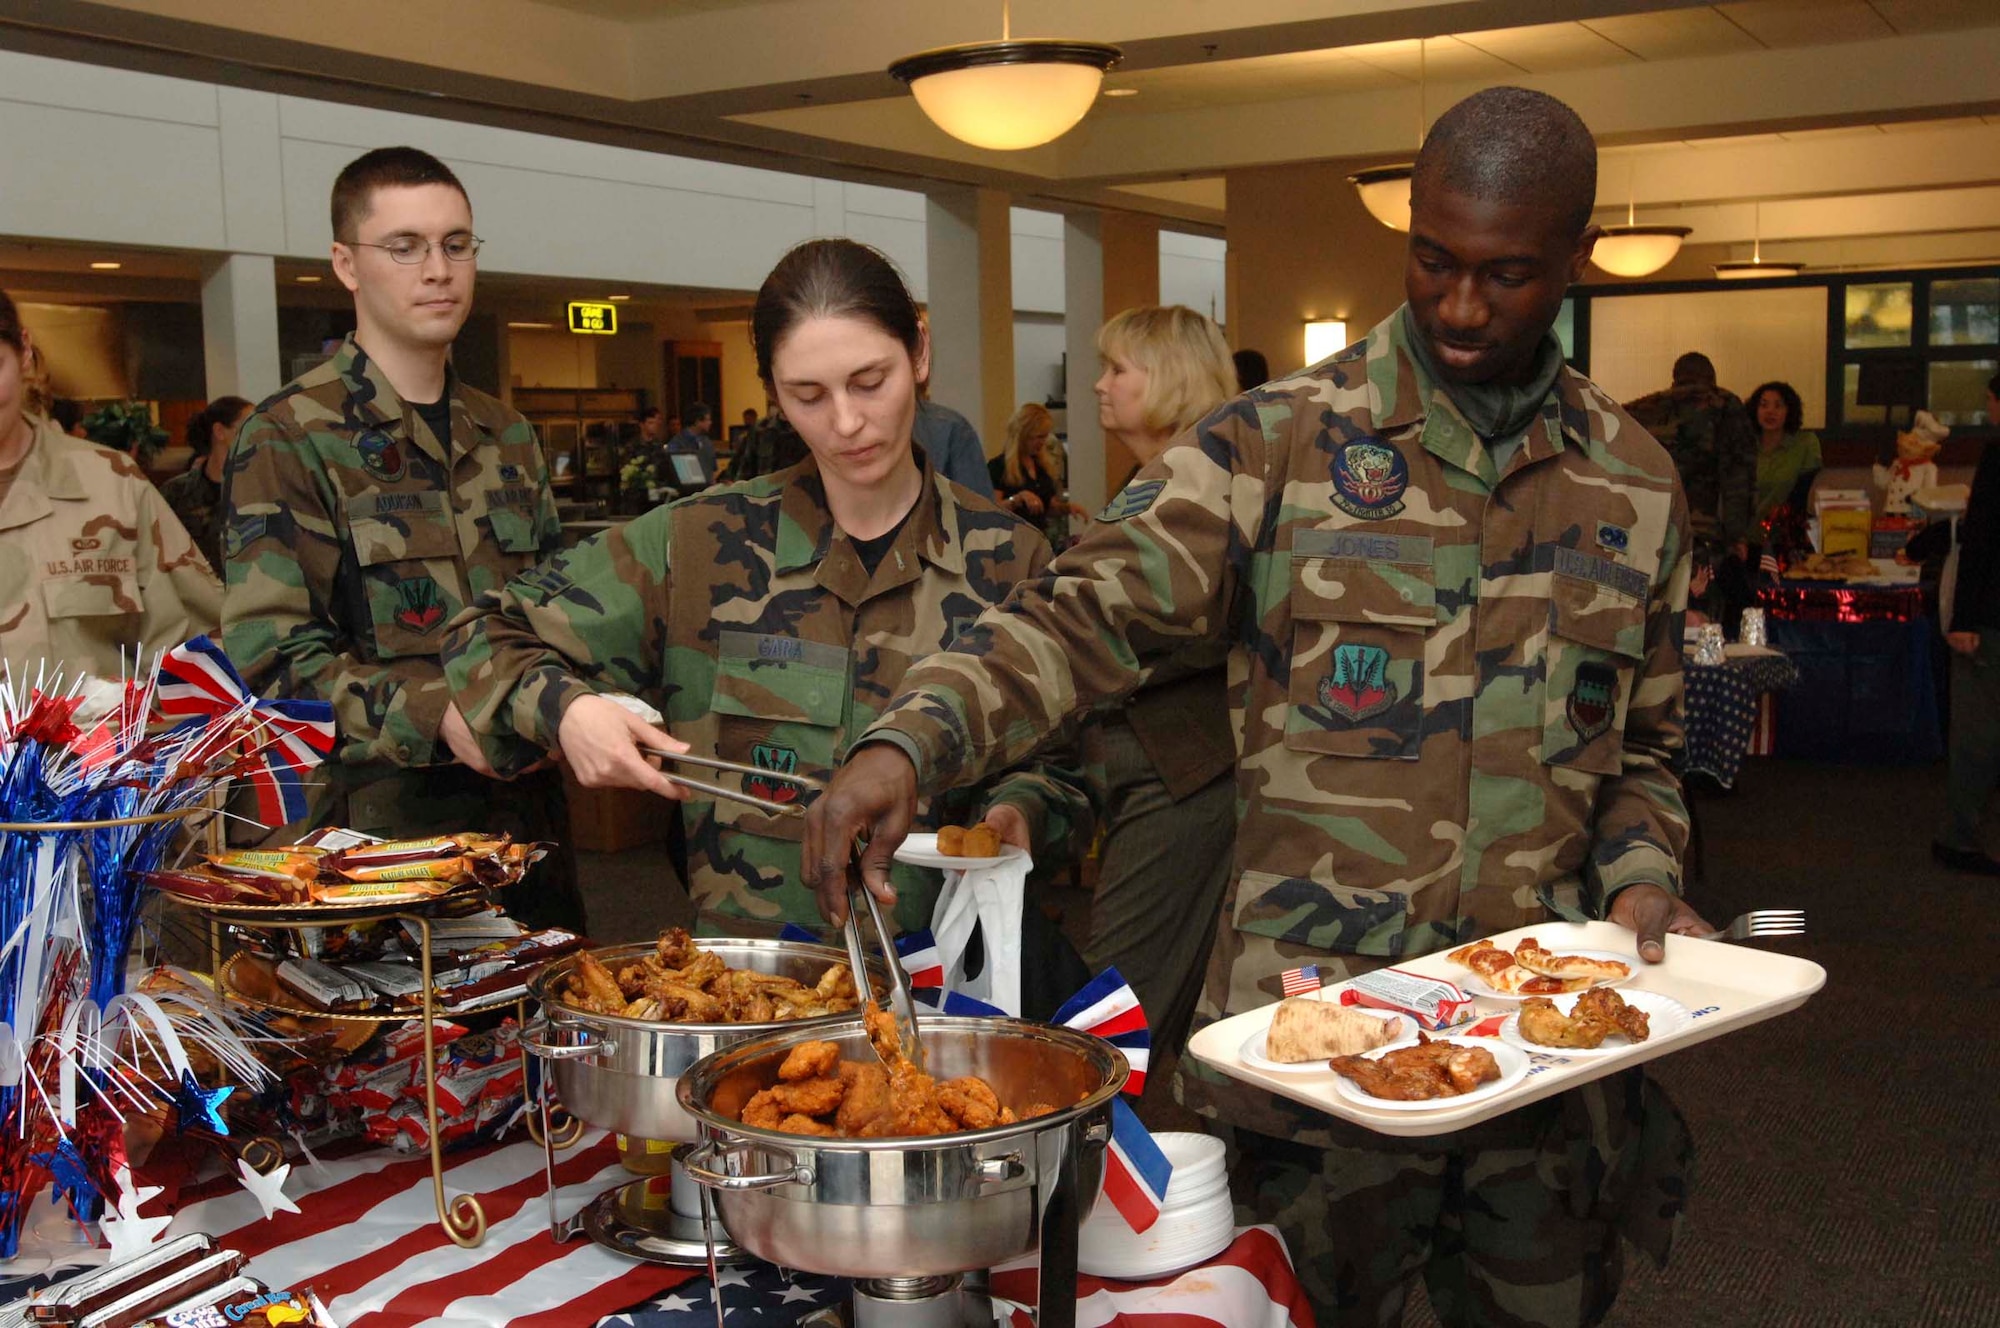 SHAW AIR FORCE BASE, S.C. -- Airmen select food for lunch Feb. 13 at the Shaw Air Force Base Chief Master Sgt. Emerson E. Williams Dining Facility during a food sampling event. A variety of food items were served by the staff for customer feedback. (U.S. Air Force photo/ Staff Sgt. Josef Cole)